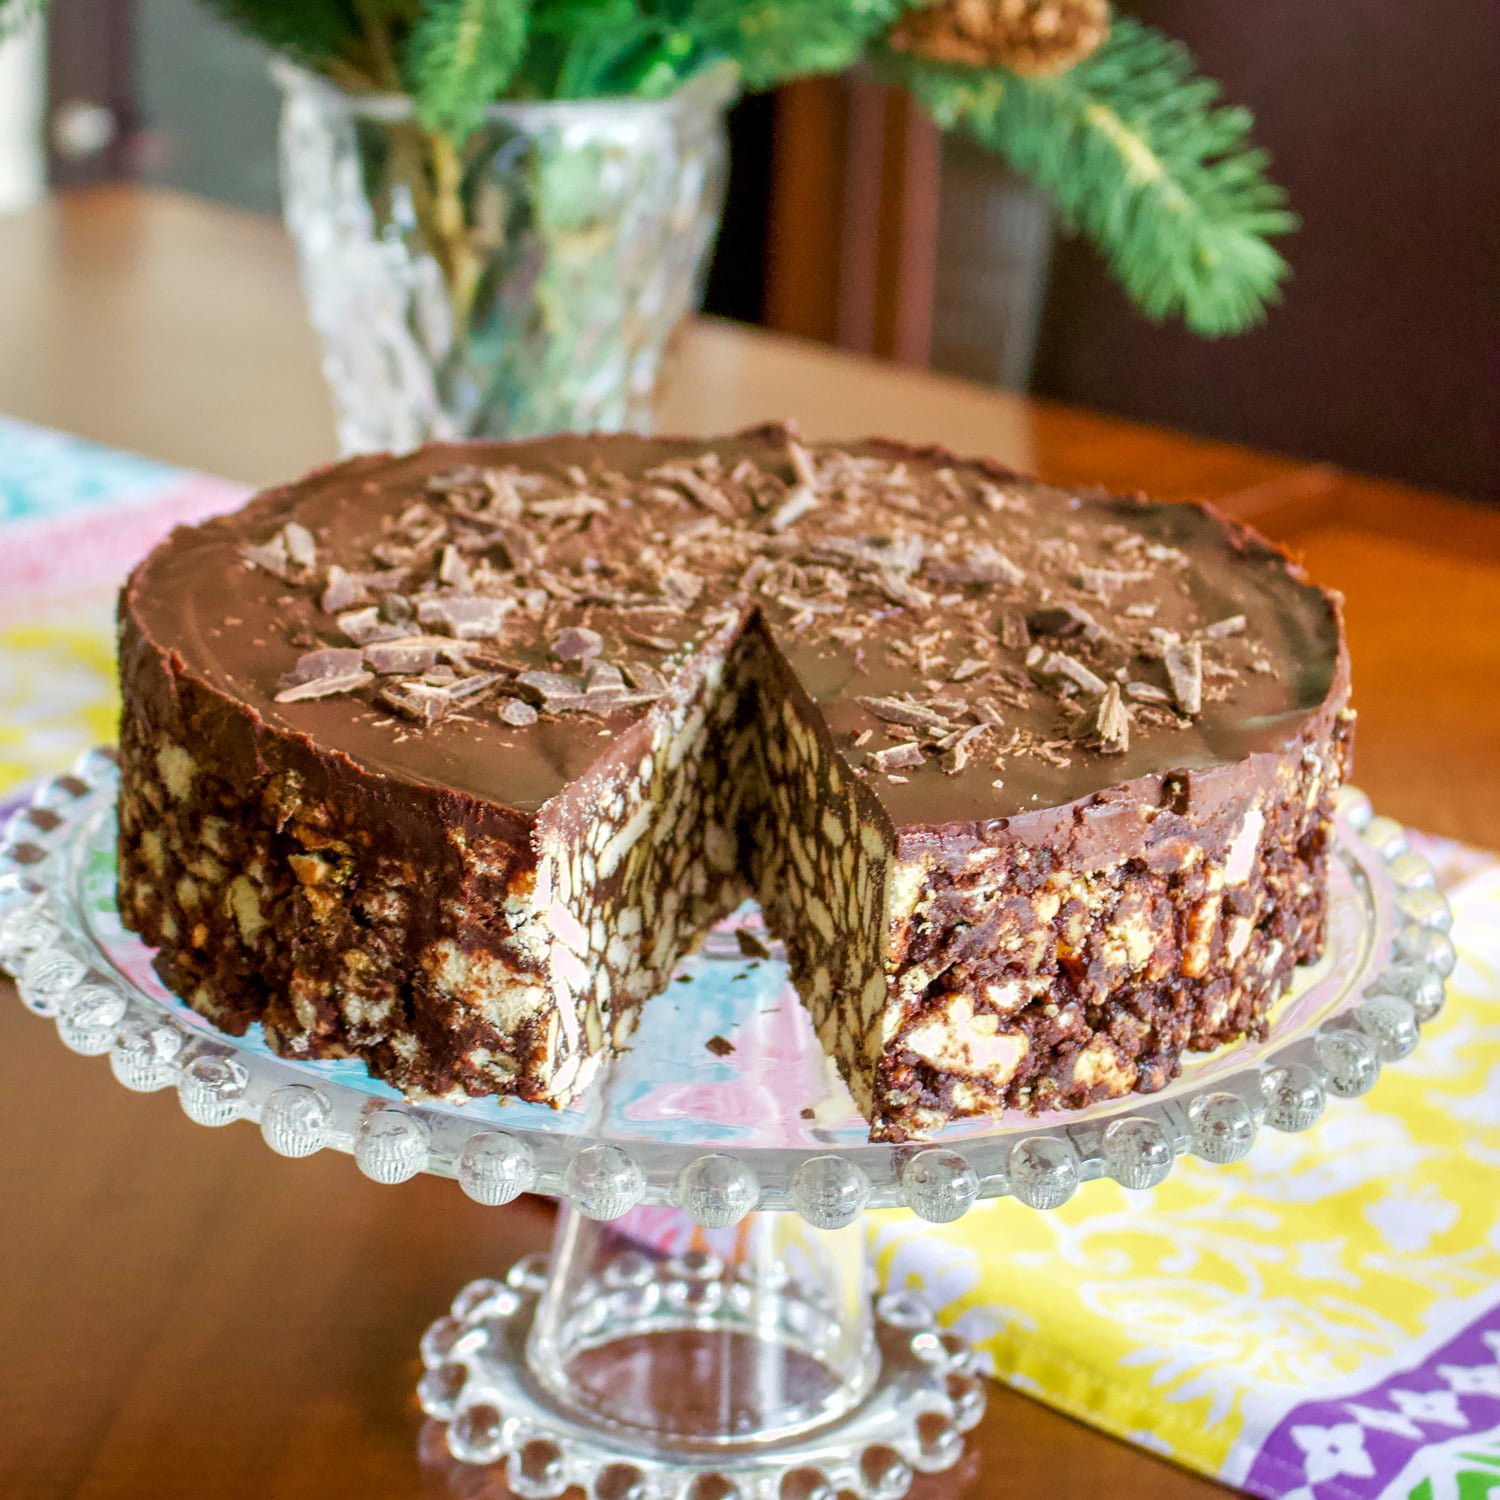 Baked Cakes &amp; Gourmet Desserts Llc
 No Bake Chocolate Biscuit Cake